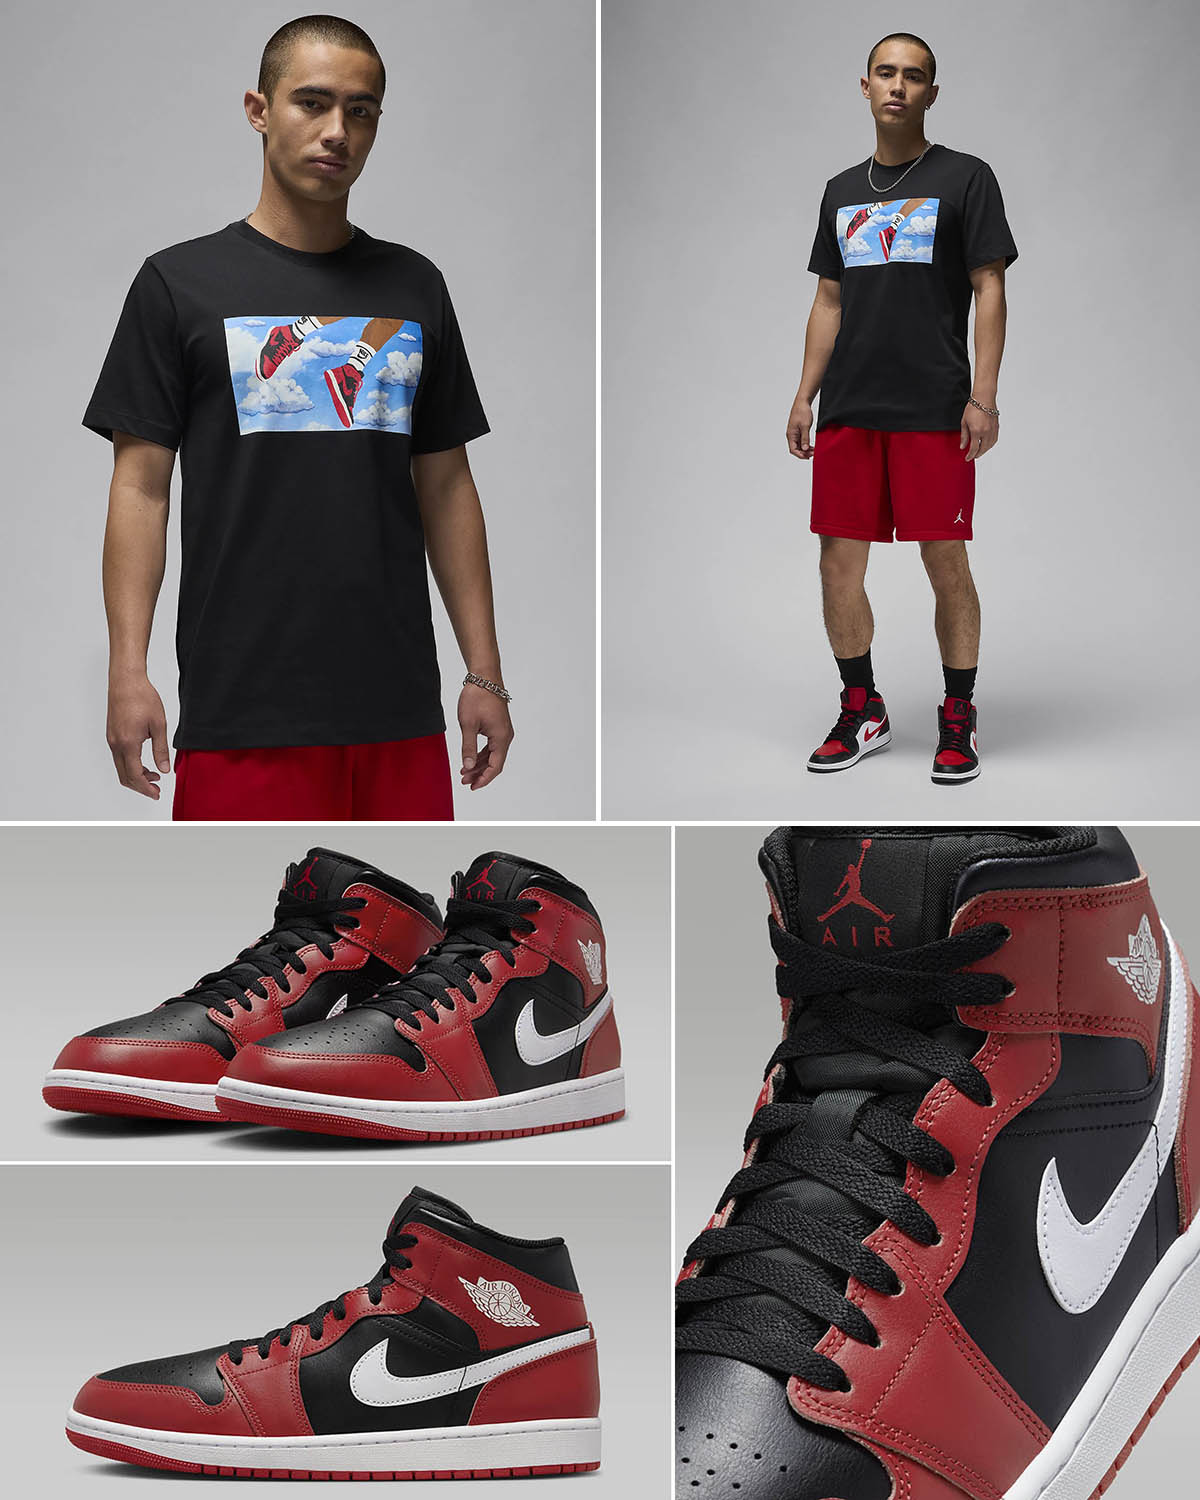 Air Jordan 1 Mid Black Gym Red White Outfit